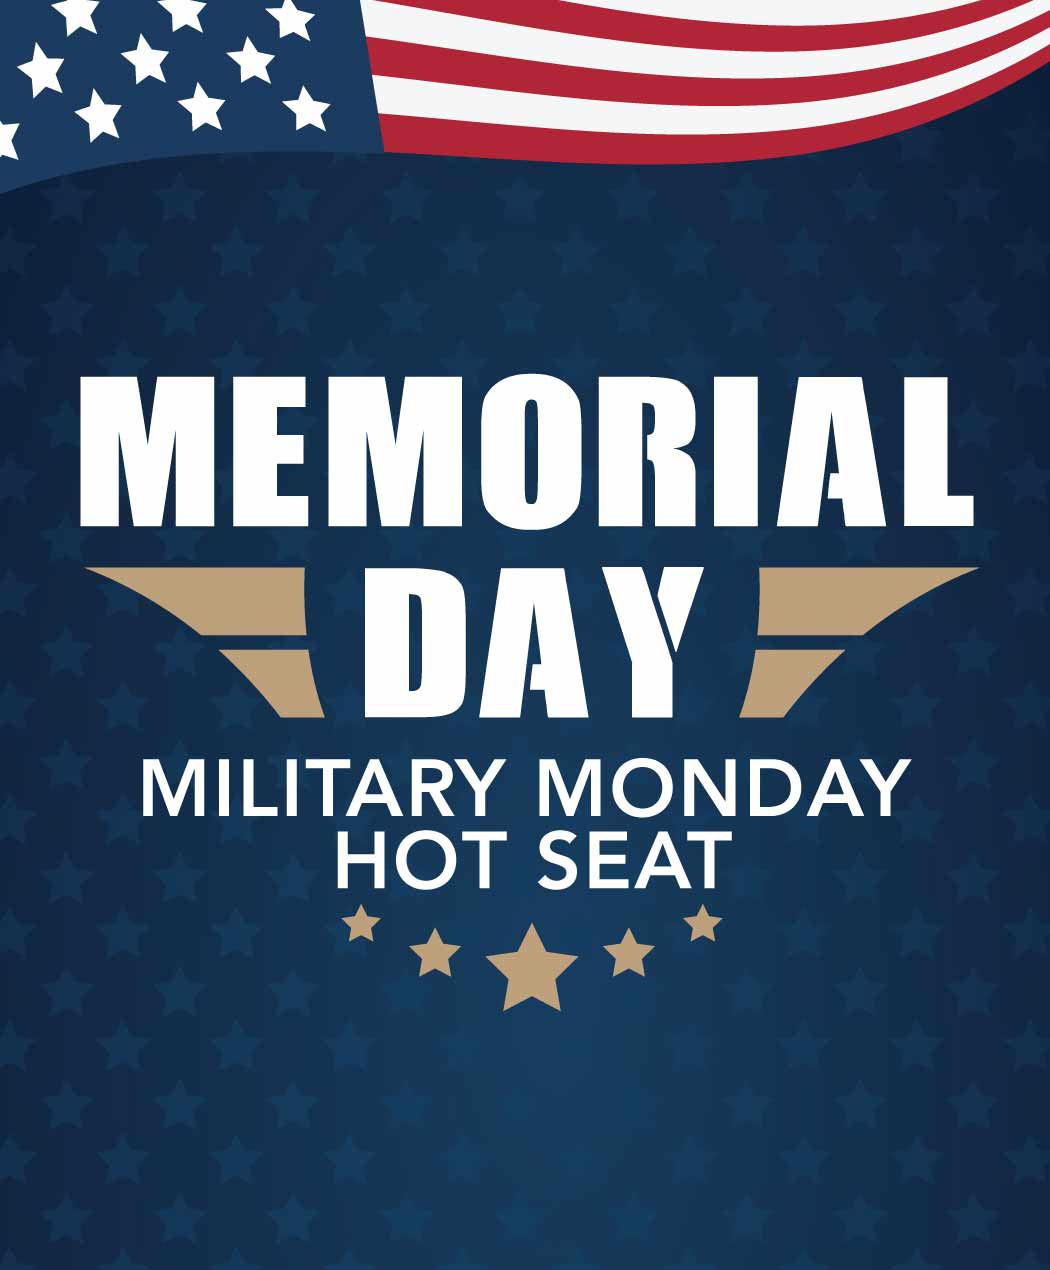 Memorial Day Military Monday Hot Seat